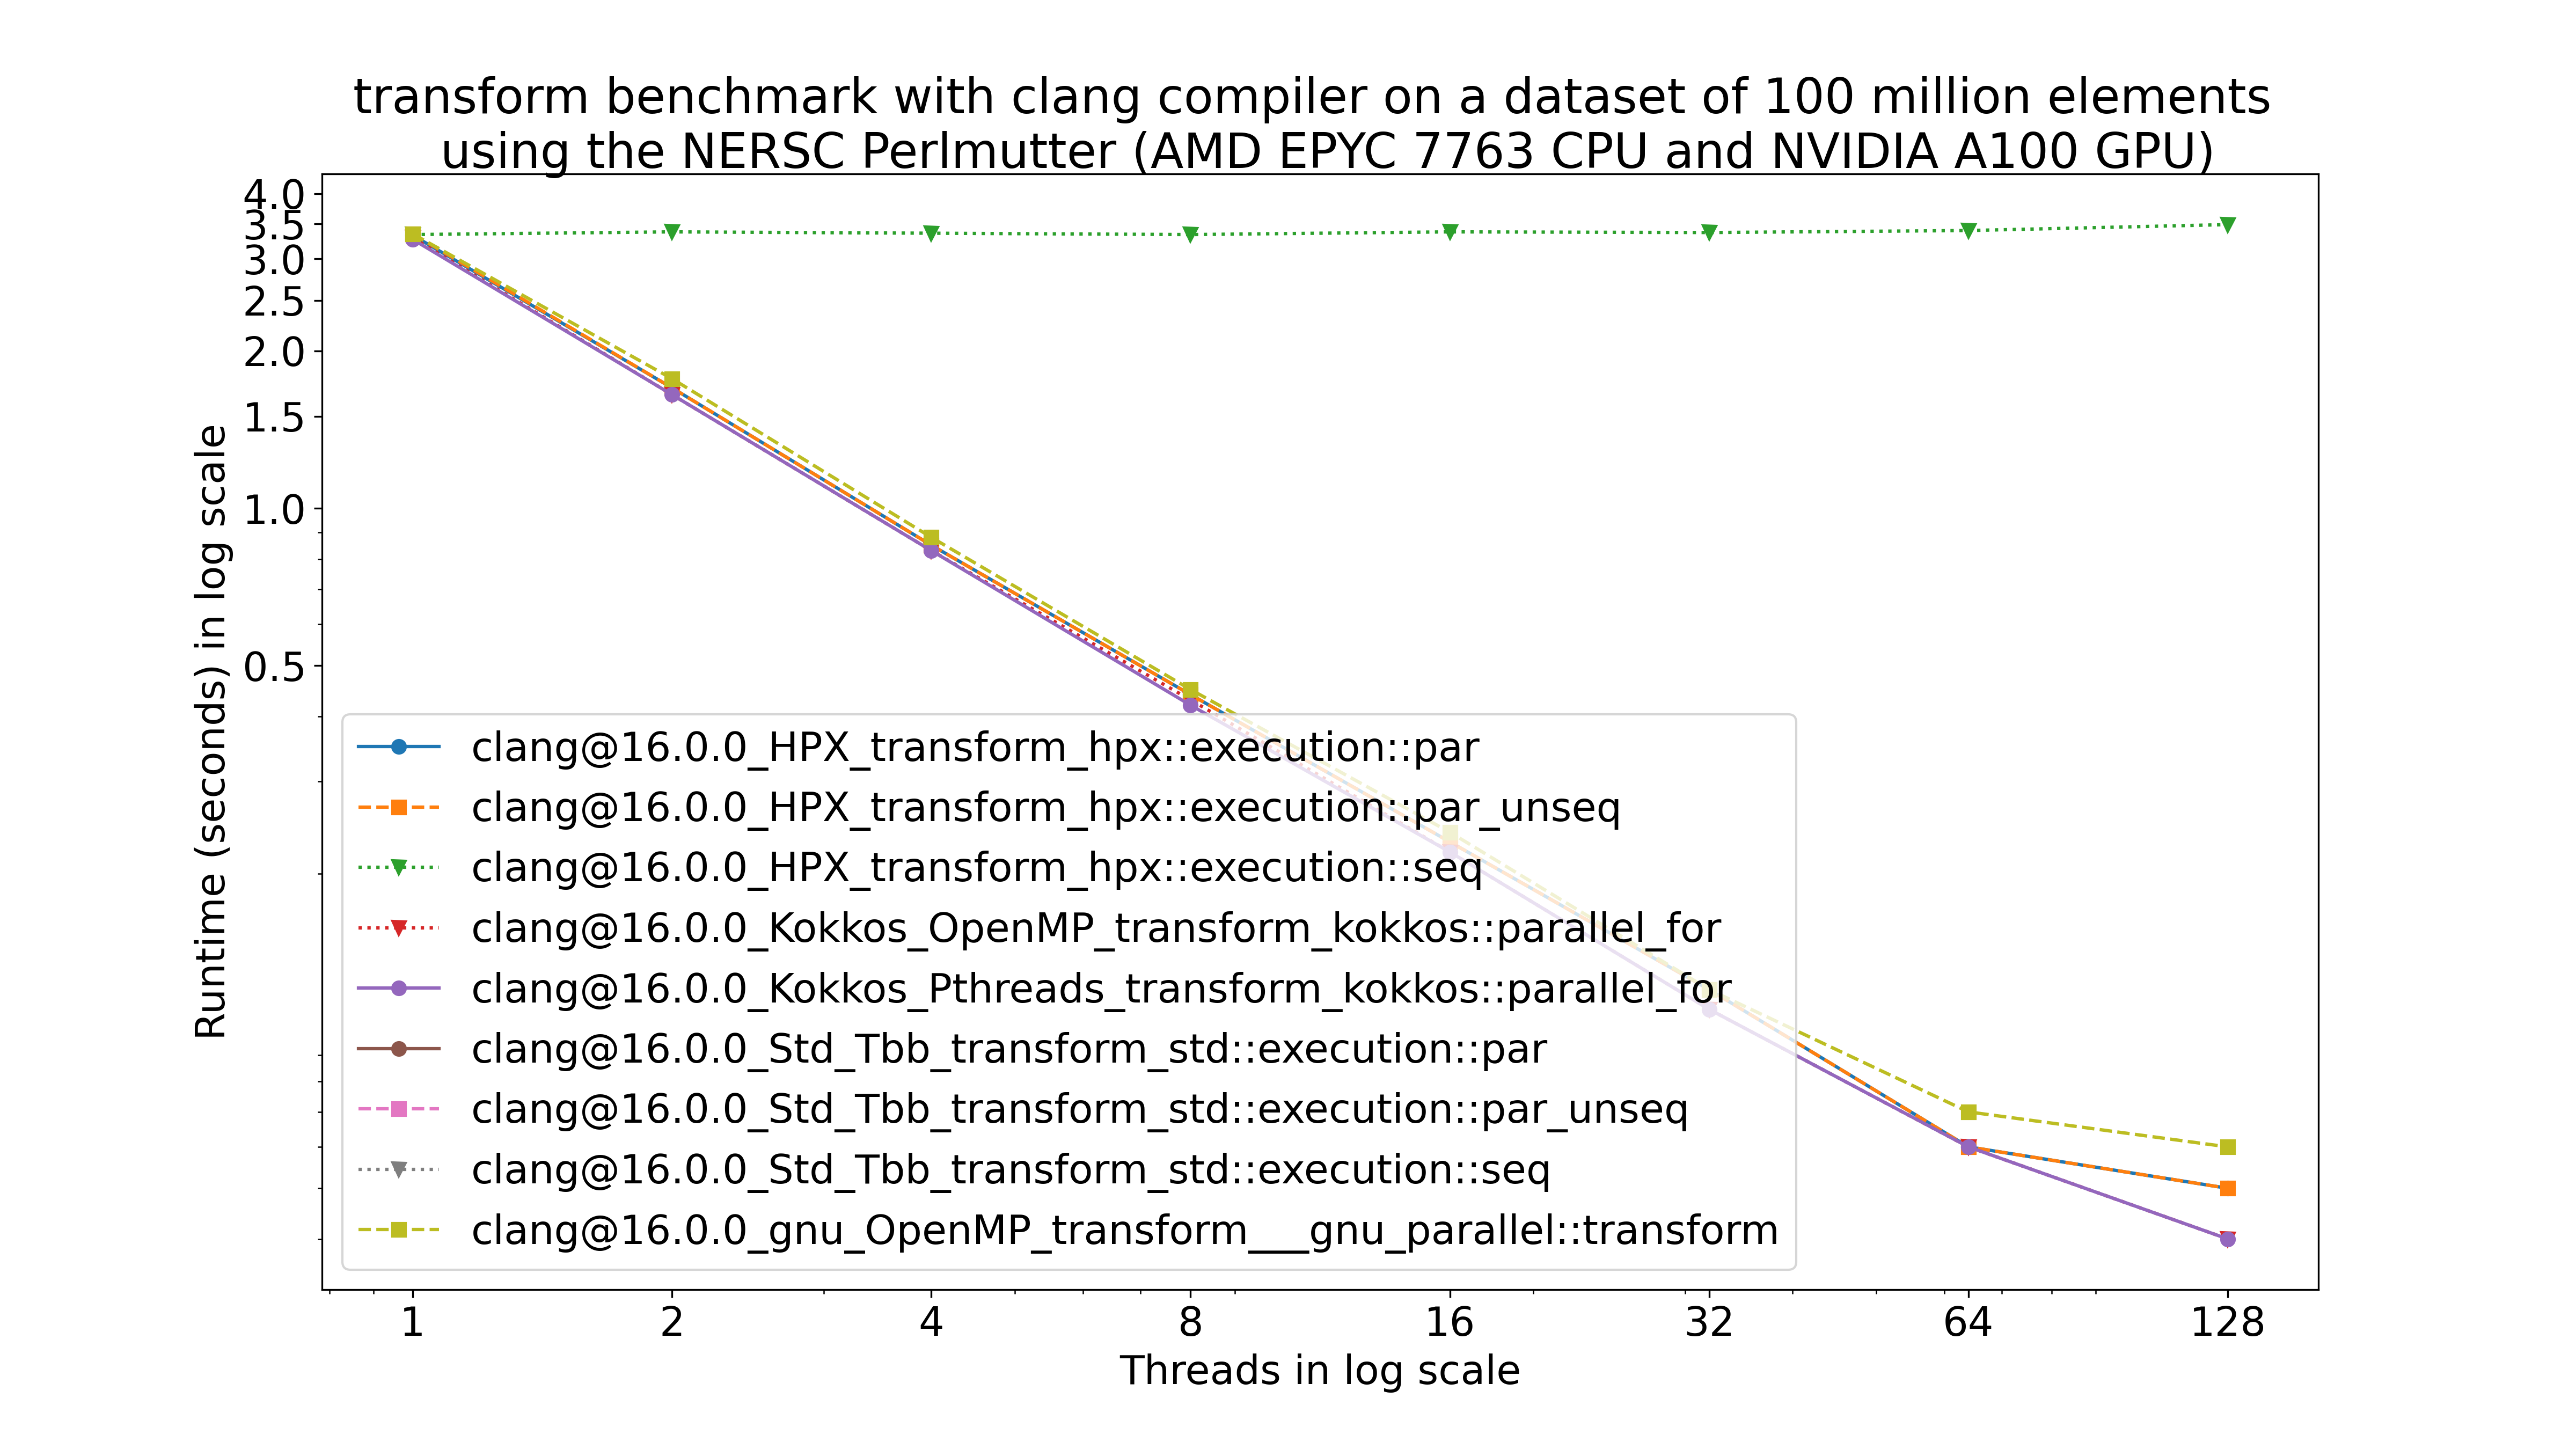 Transform with Clang@16.0.0